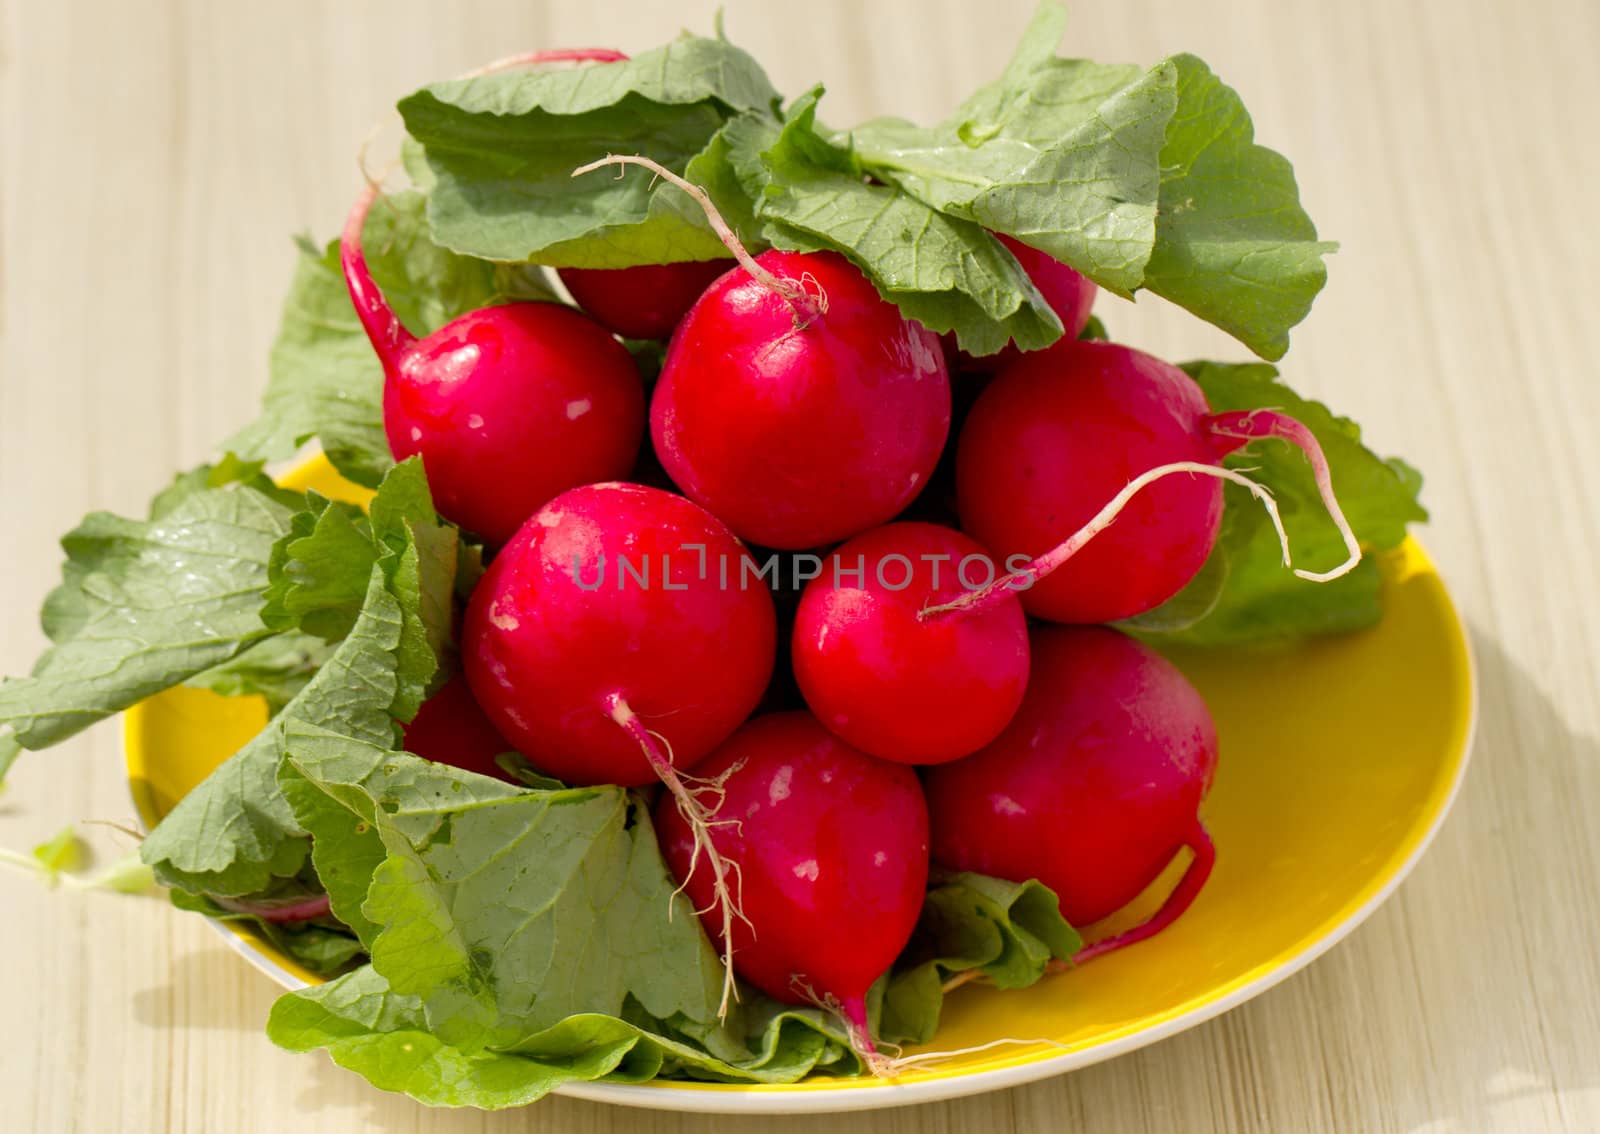 Bunch of radish on a wooden board